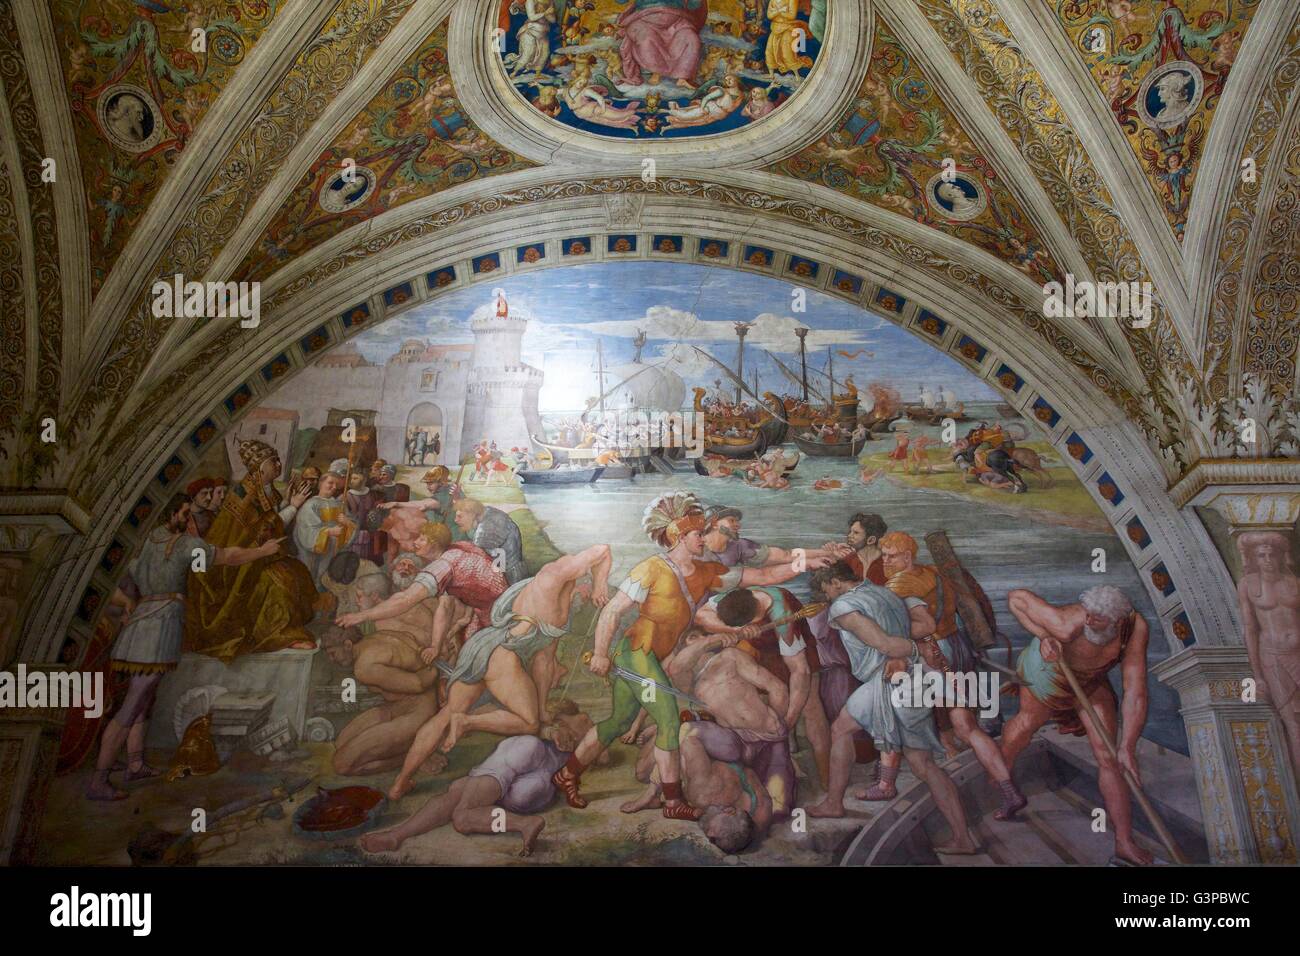 Battle of Ostia, Room of Fire in the Borgo, 1514-1515, Raphael Rooms, Apostolic Palace, Vatican Museums, Rome, Italy Stock Photo